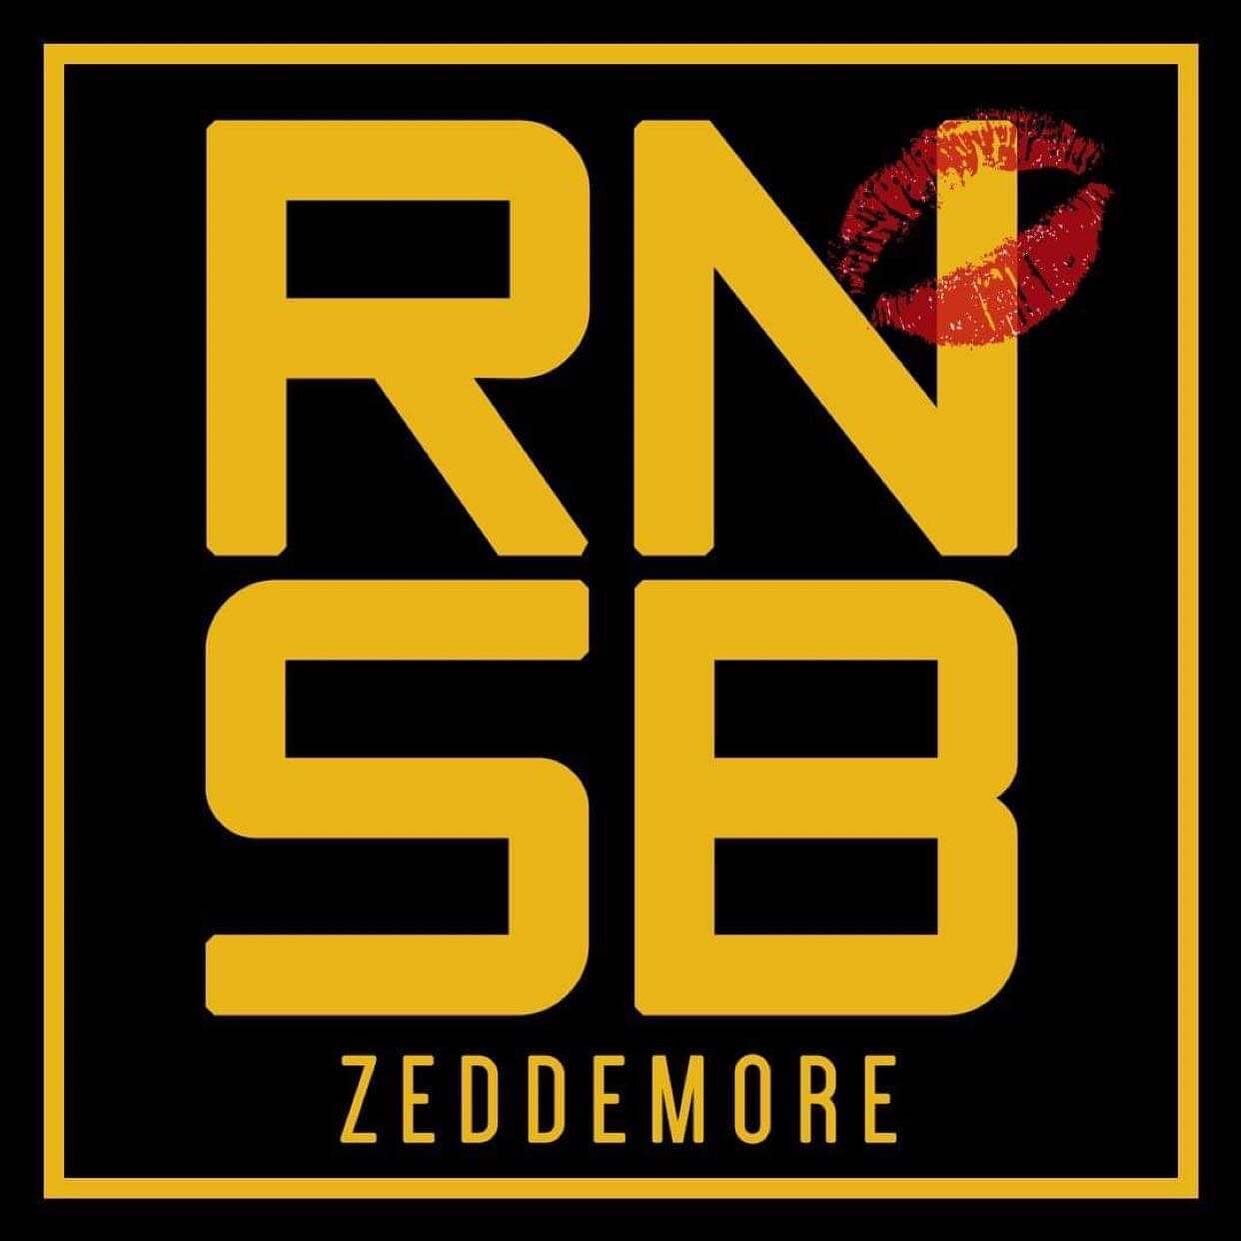 Our new single &ldquo;RNSB&rdquo; drops this Friday!